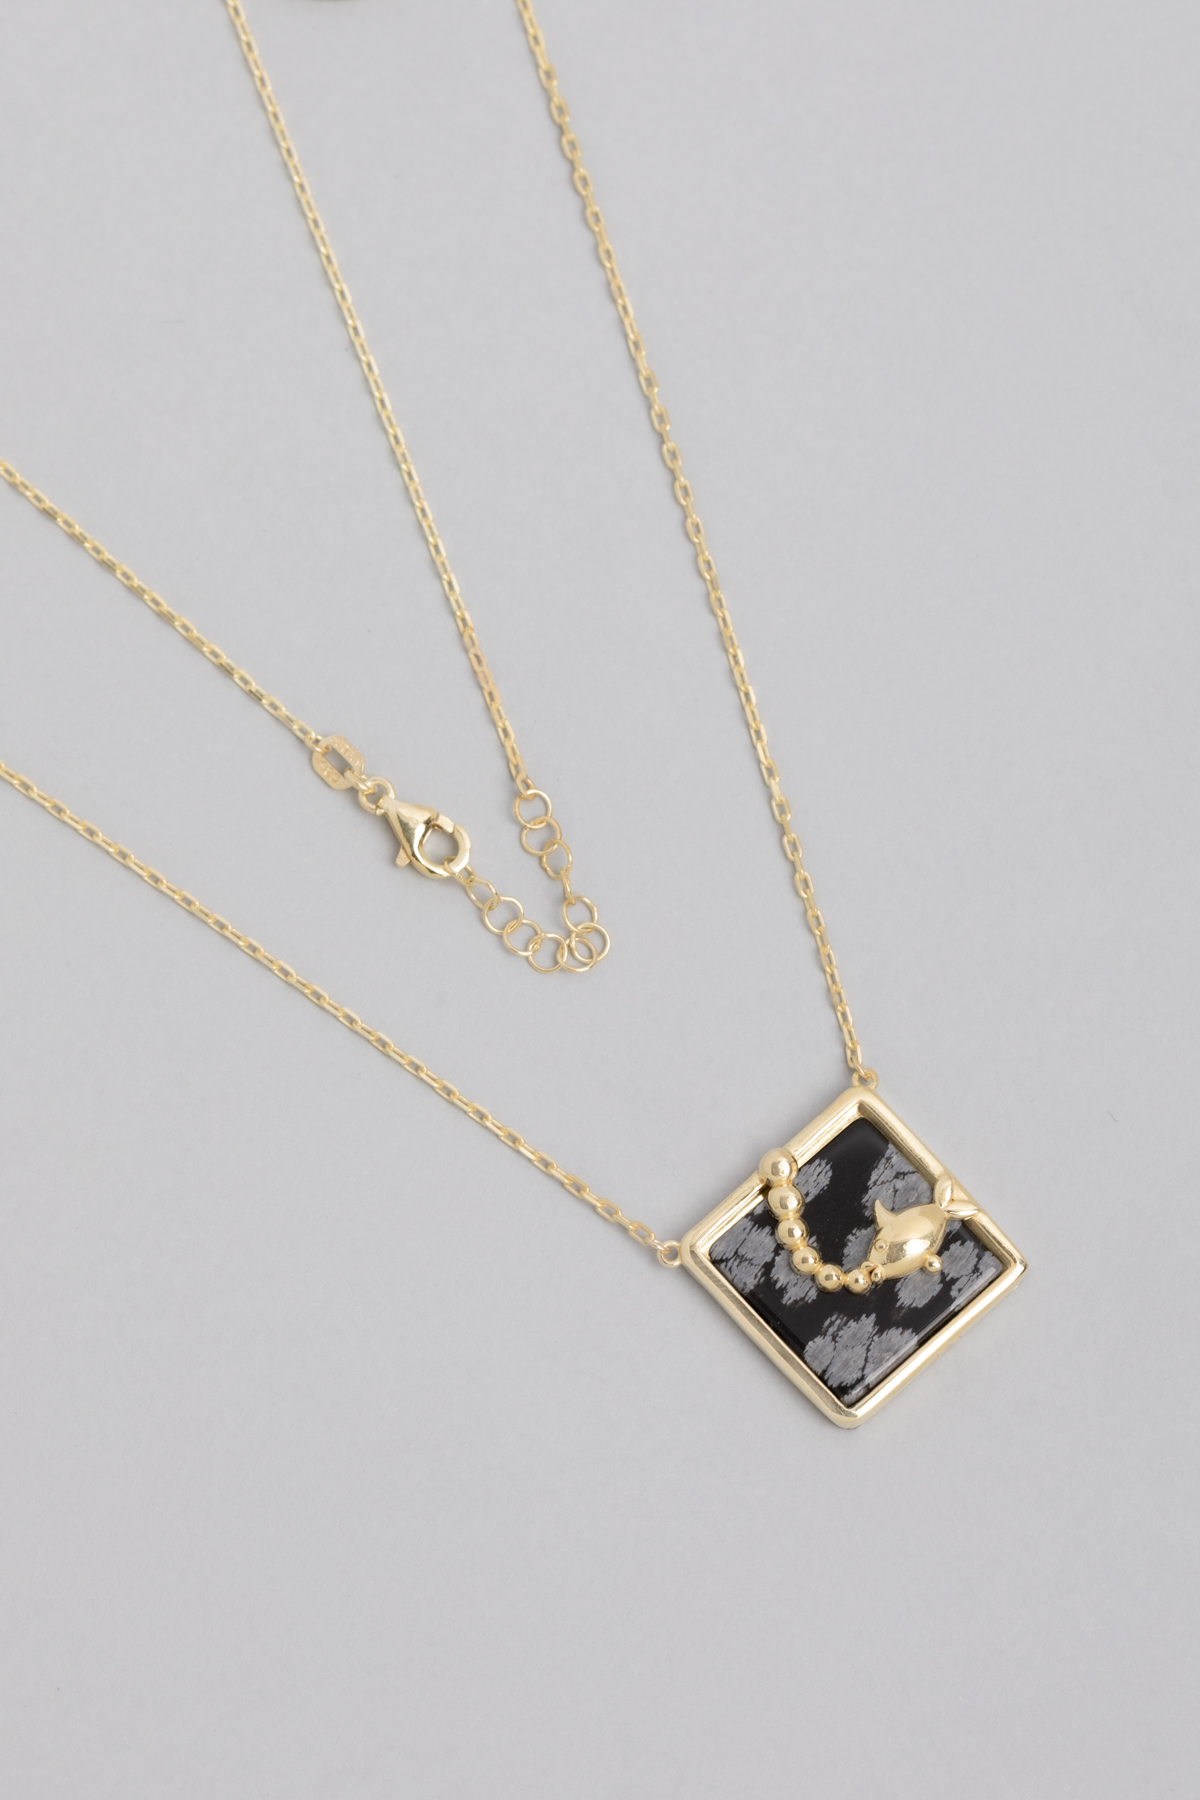 18 Karat Yellow Gold Plated Silver Necklace with Dalmatian Stone 